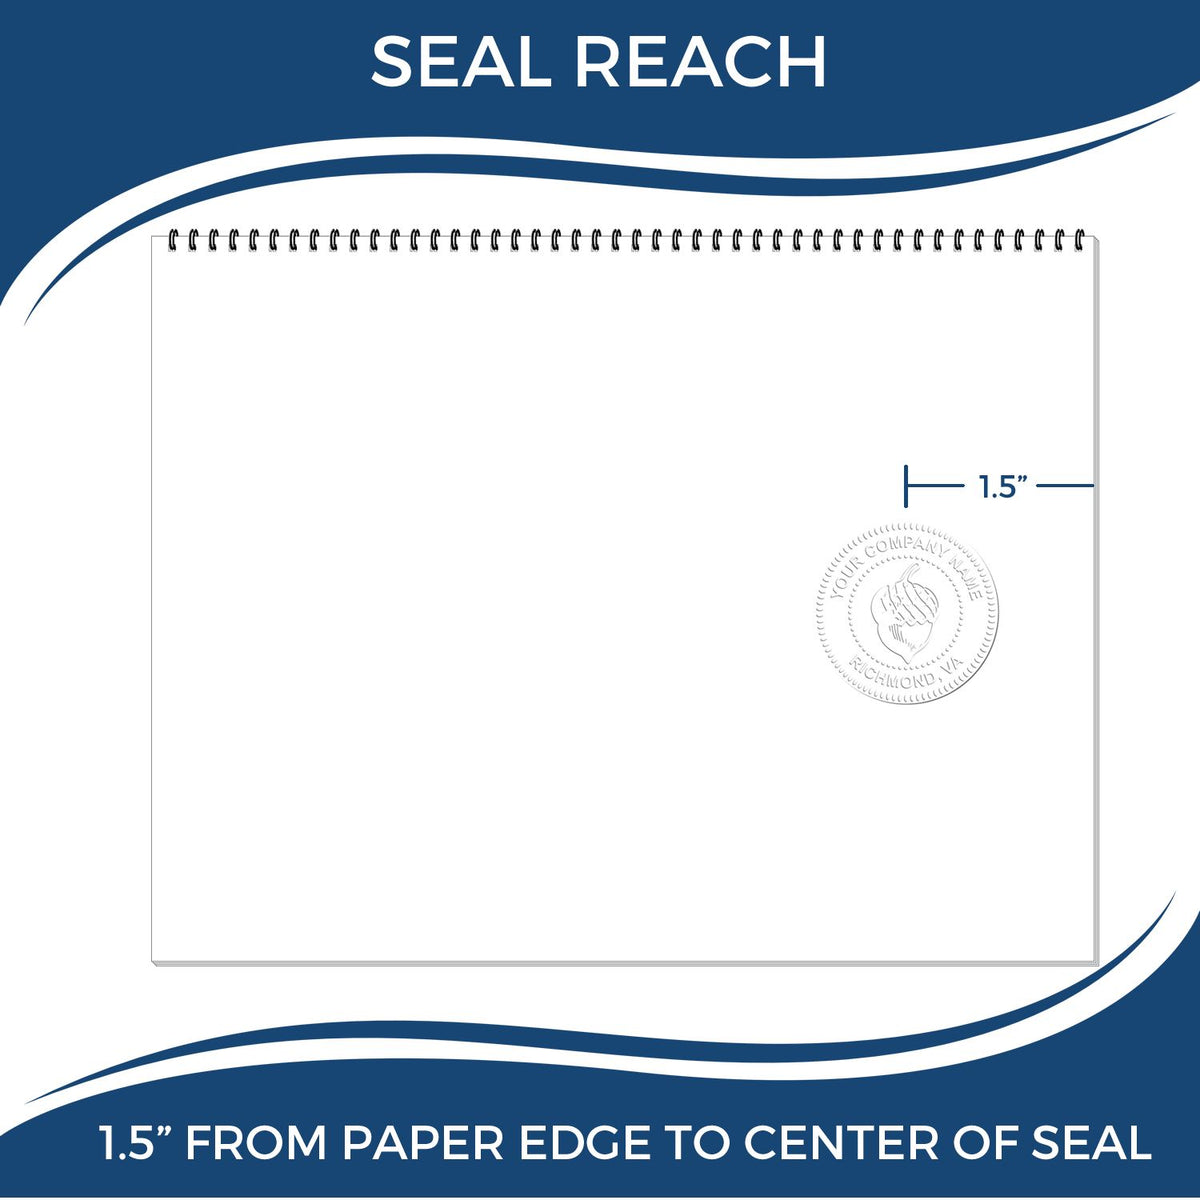 An infographic showing the seal reach which is represented by a ruler and a miniature seal image of the Gift Michigan Land Surveyor Seal